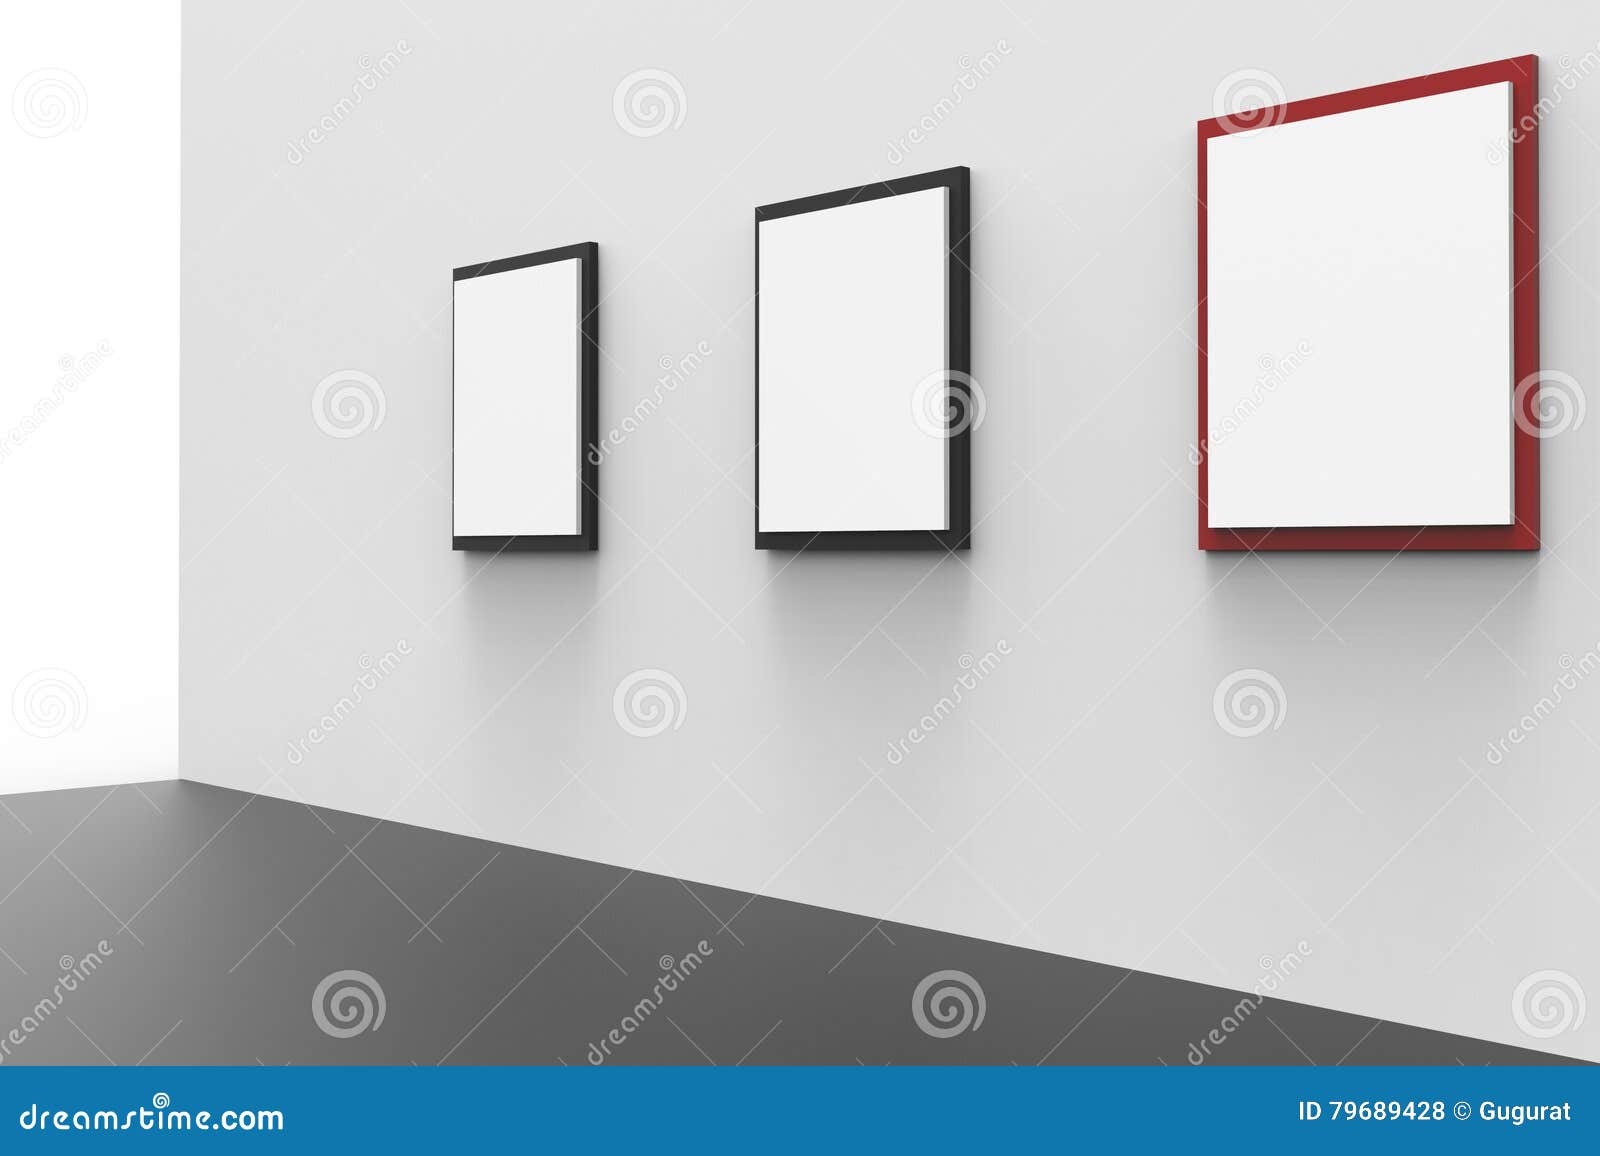 Gallery Minimal Display And Museum Three Picture Frame 